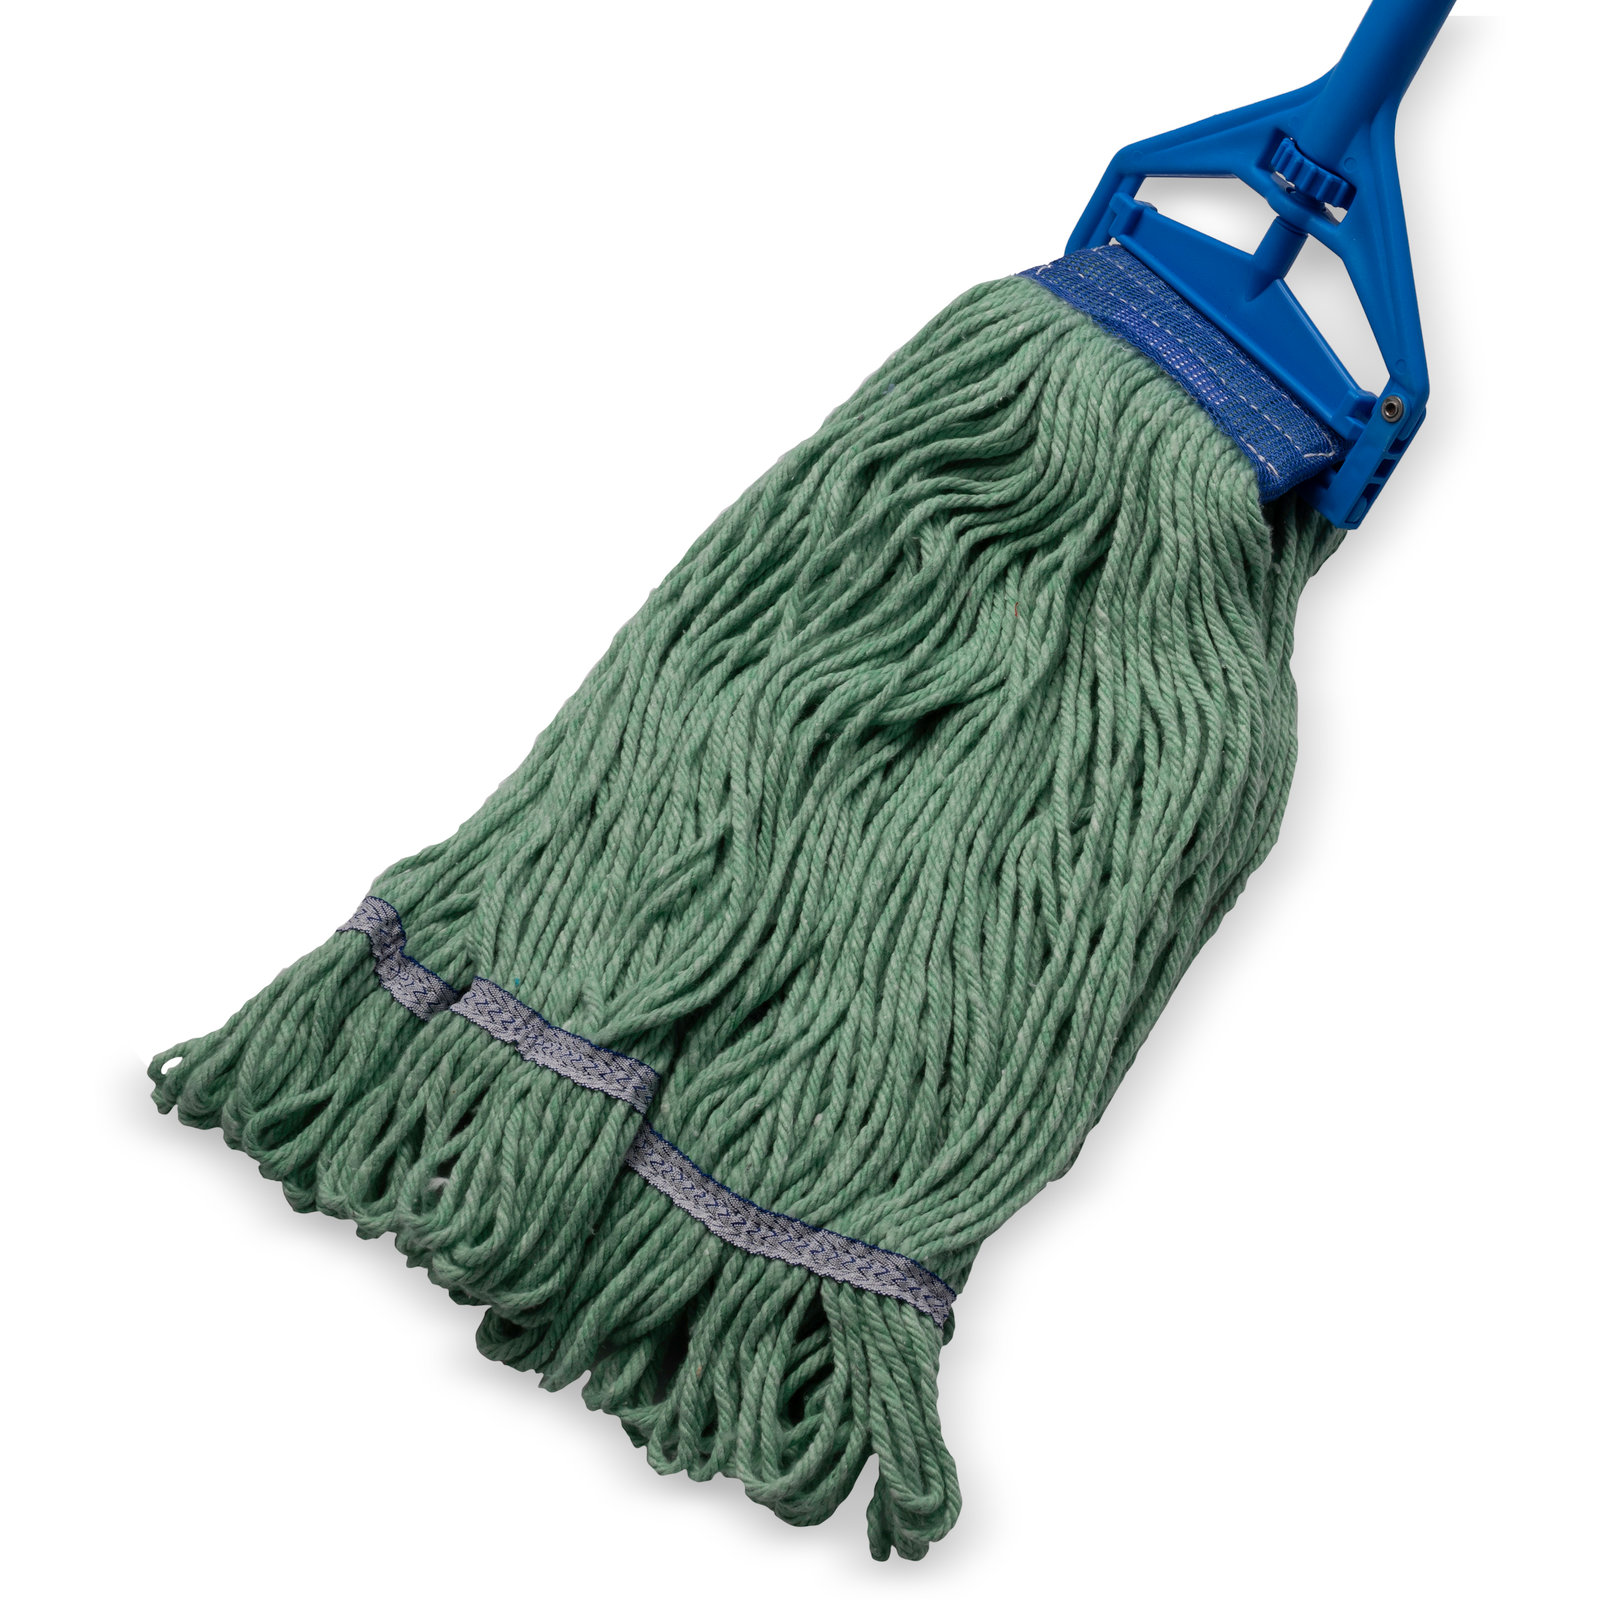 Lavex 18 oz. Blue Microfiber Looped End Wet Mop Head with 5 Green Headband